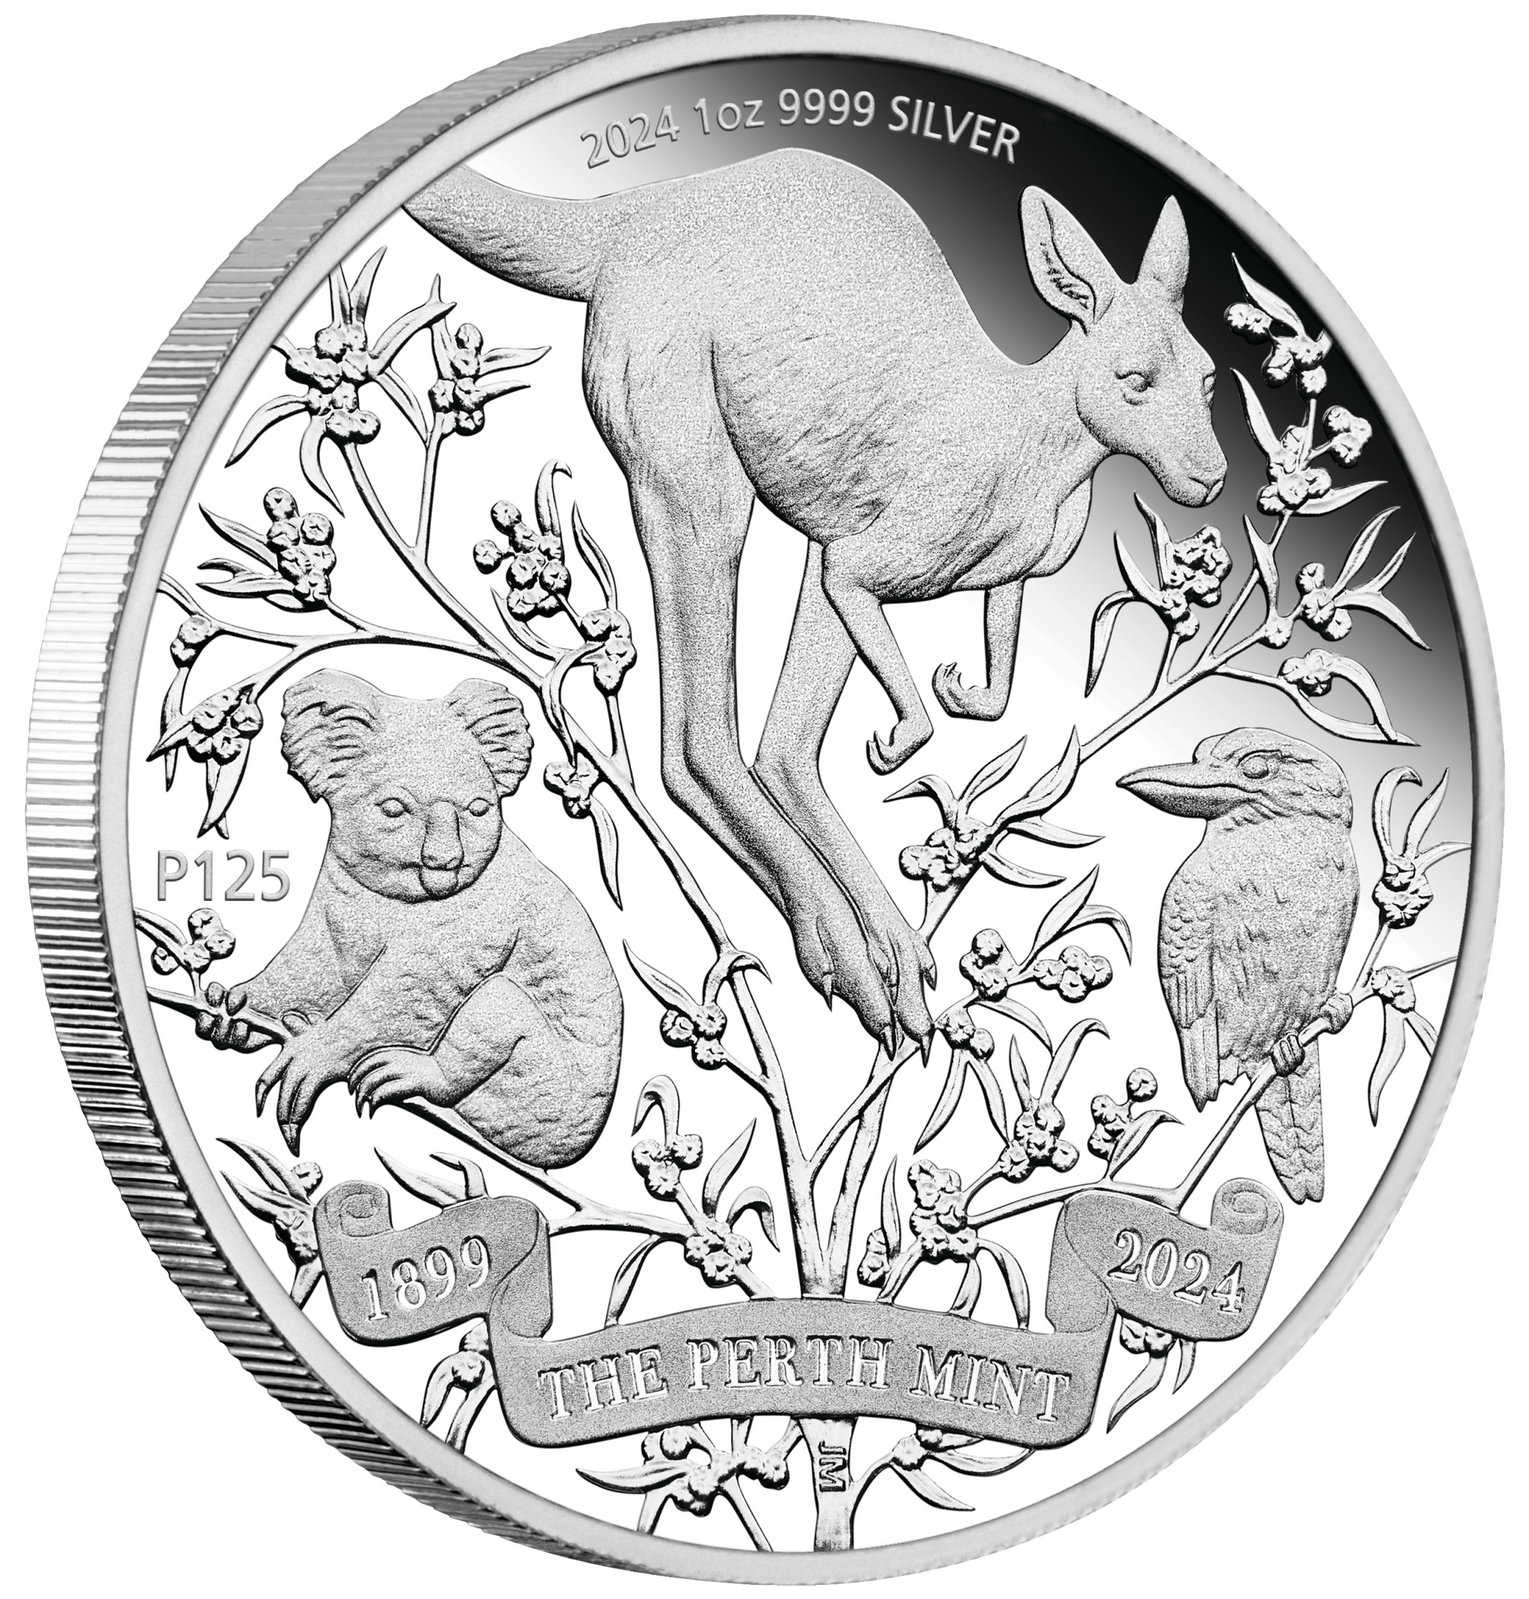 2024 The Perth Mint's 125th Anniversary 1oz Silver Proof Coin